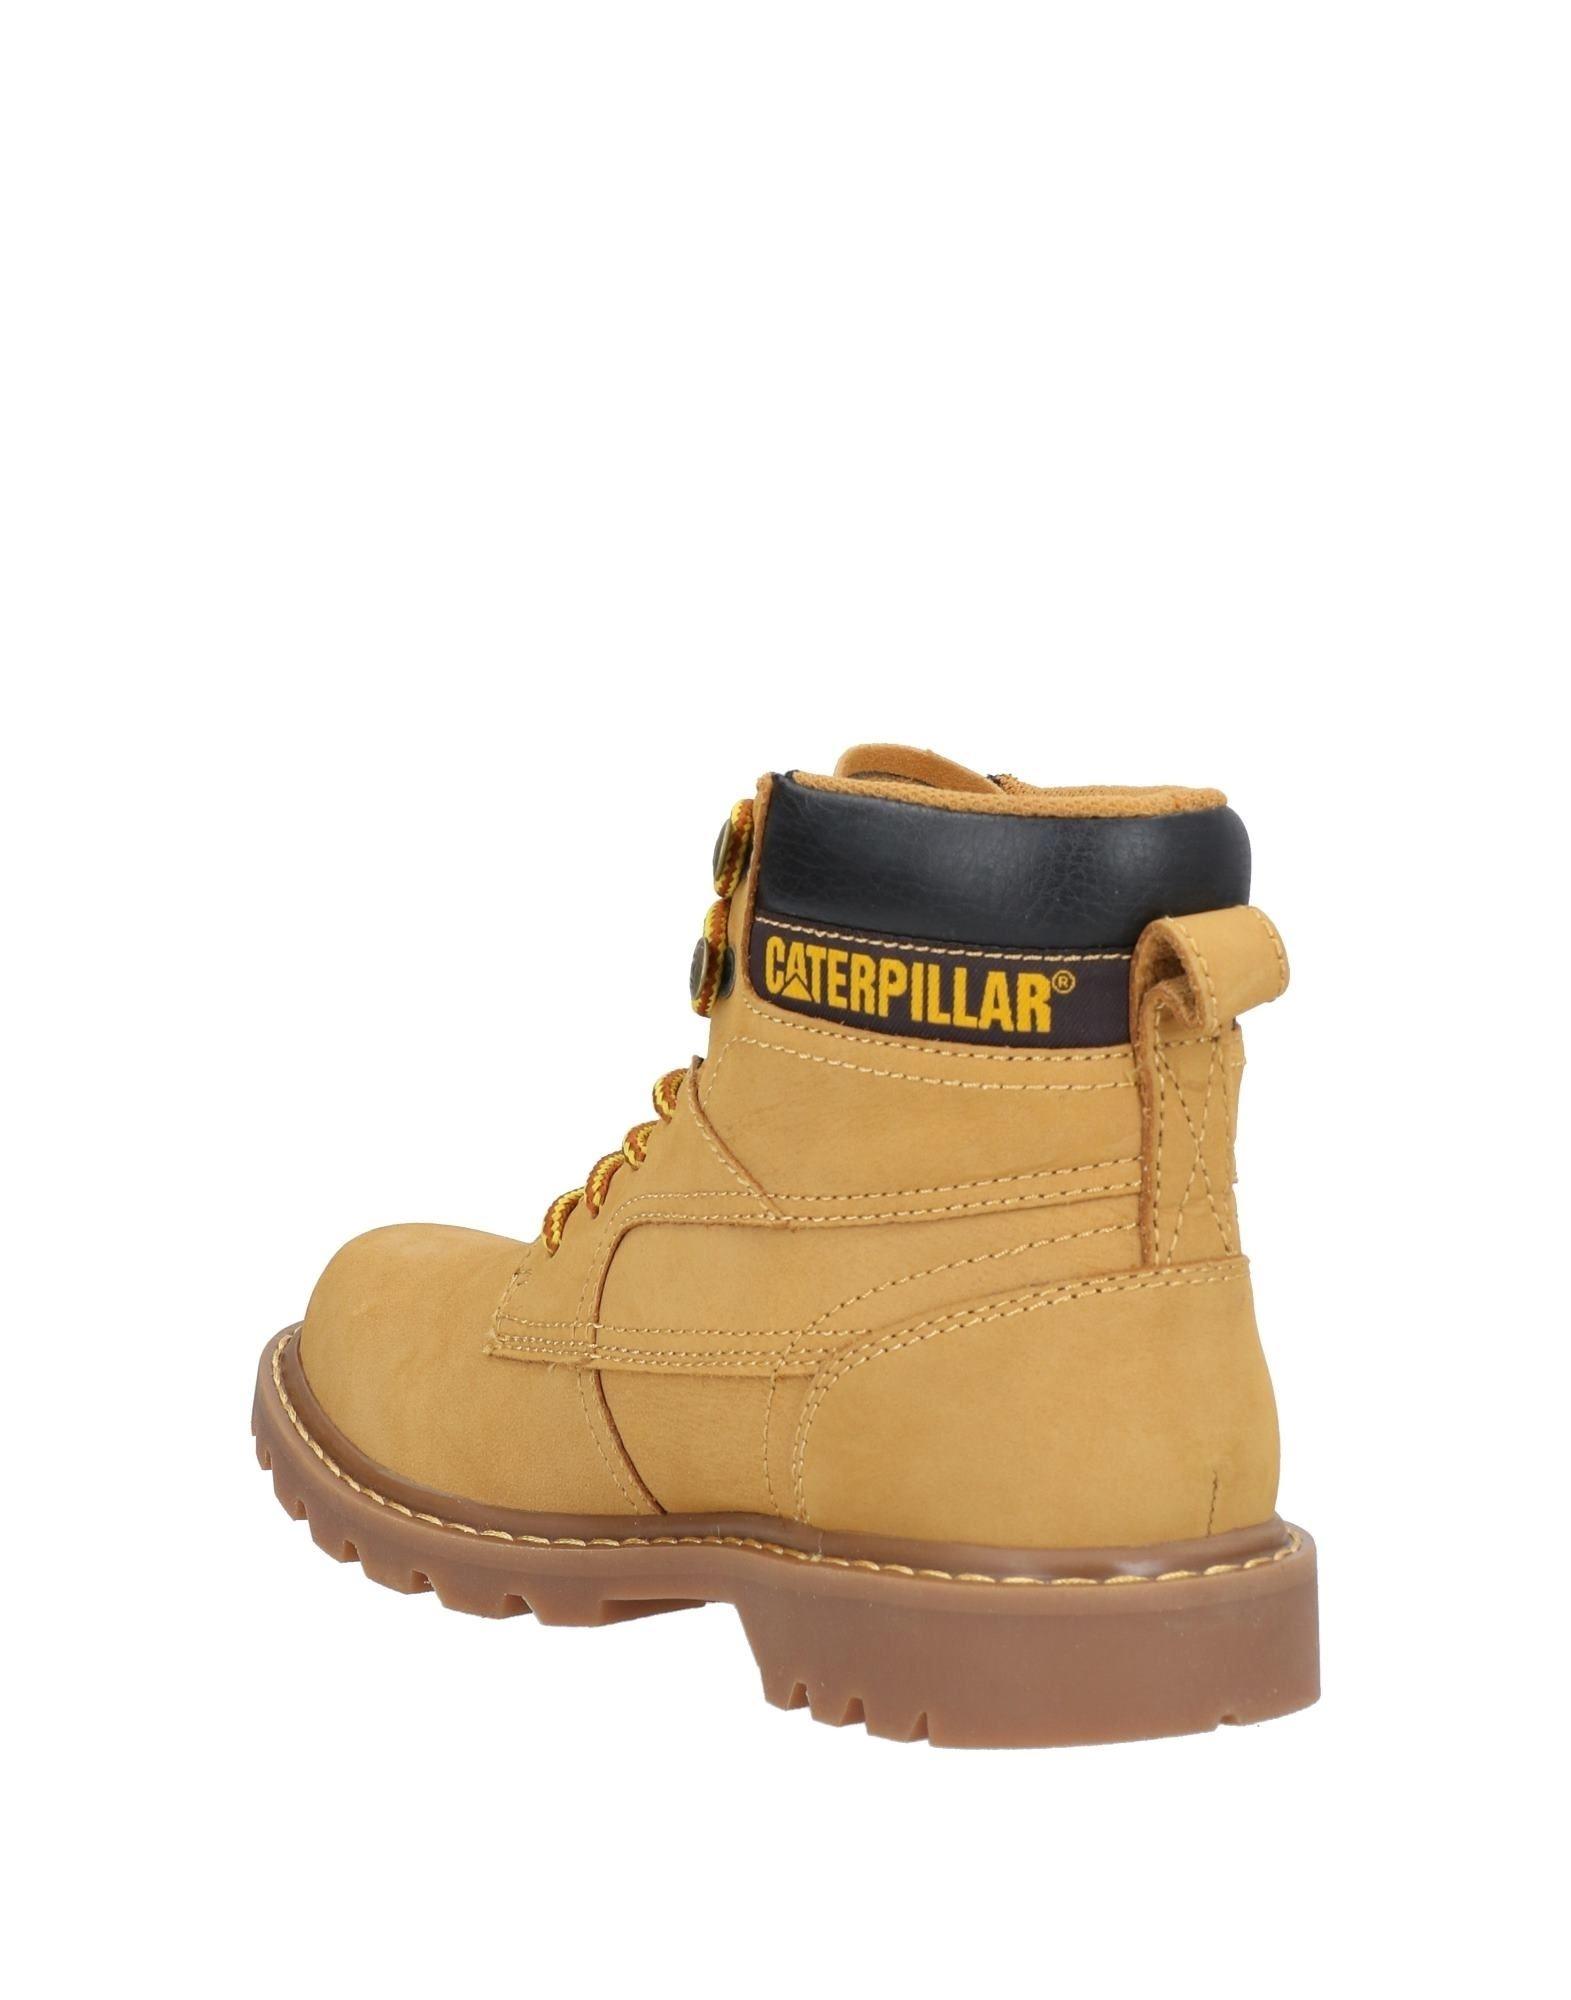 Caterpillar Leather Ankle Boots in Camel (Natural) for Men | Lyst